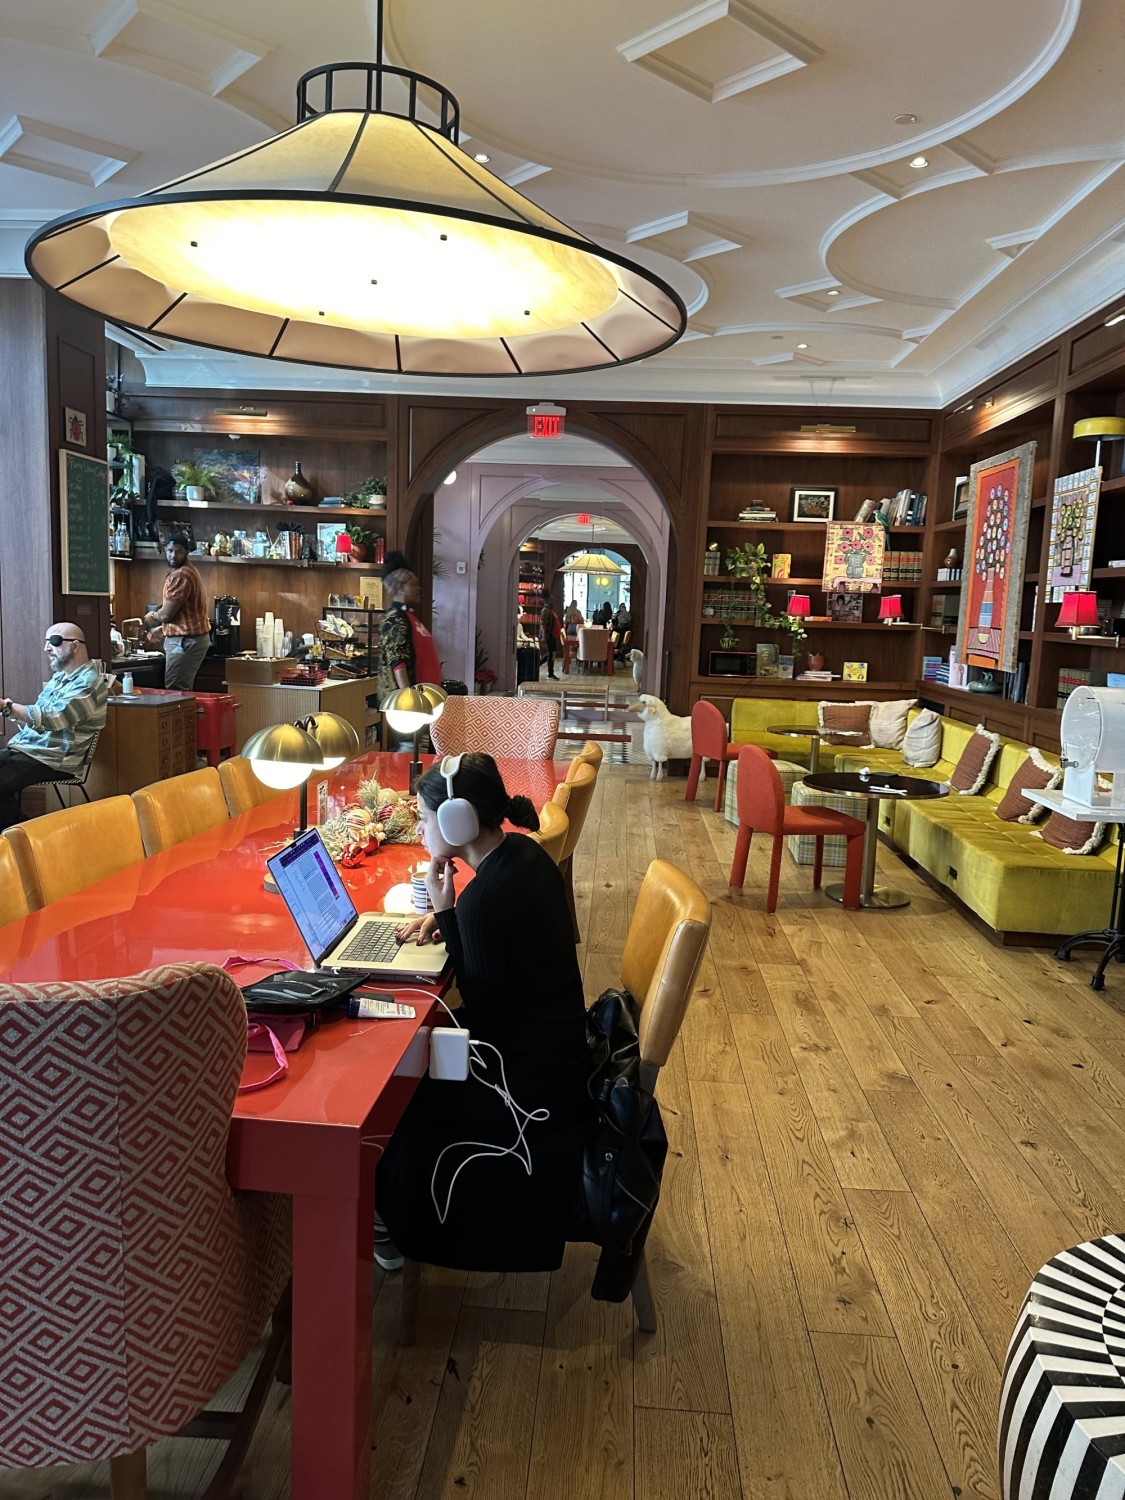 Lounge area at the Funny Library Coffee Shop with one woman working on a laptop and others sitting. There is a long red table and a yellow long sofa in view, as well as artwork and accessories on the shelves and walls.